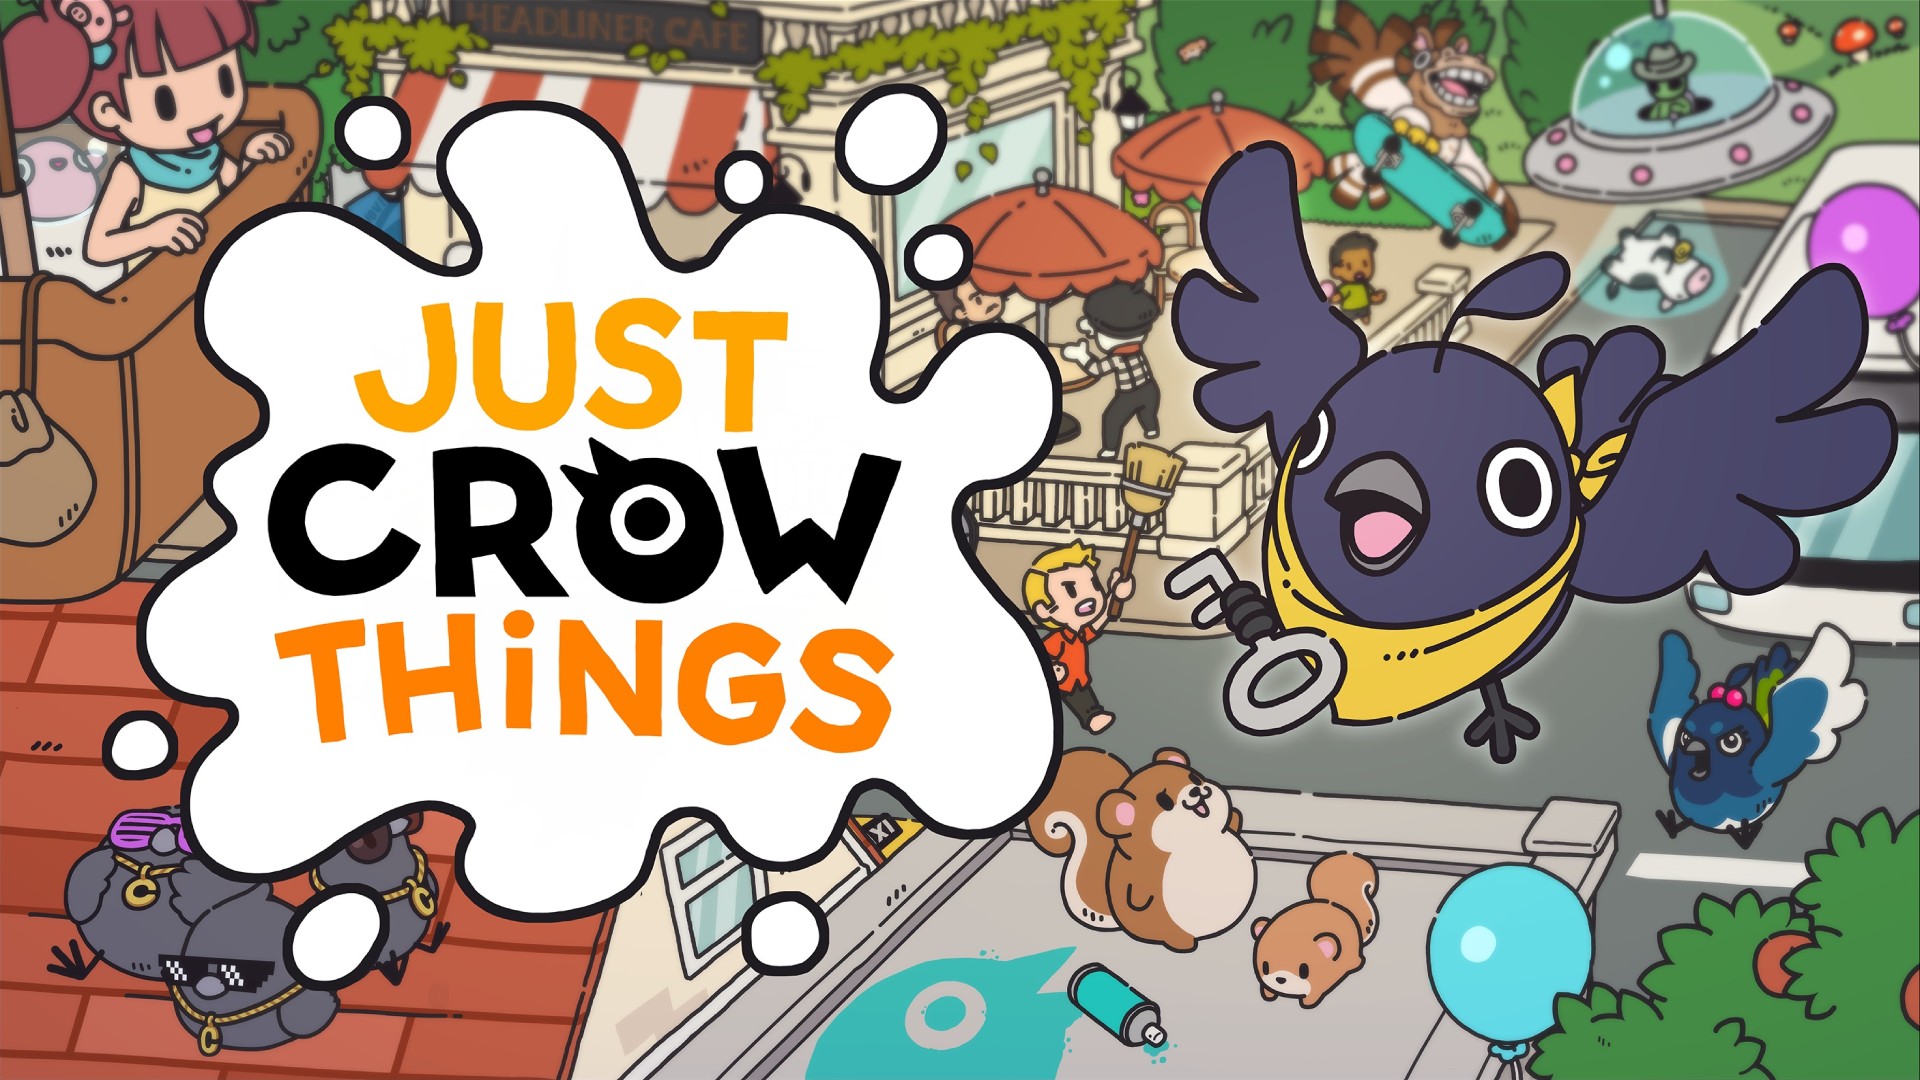 Just Crow Things logo